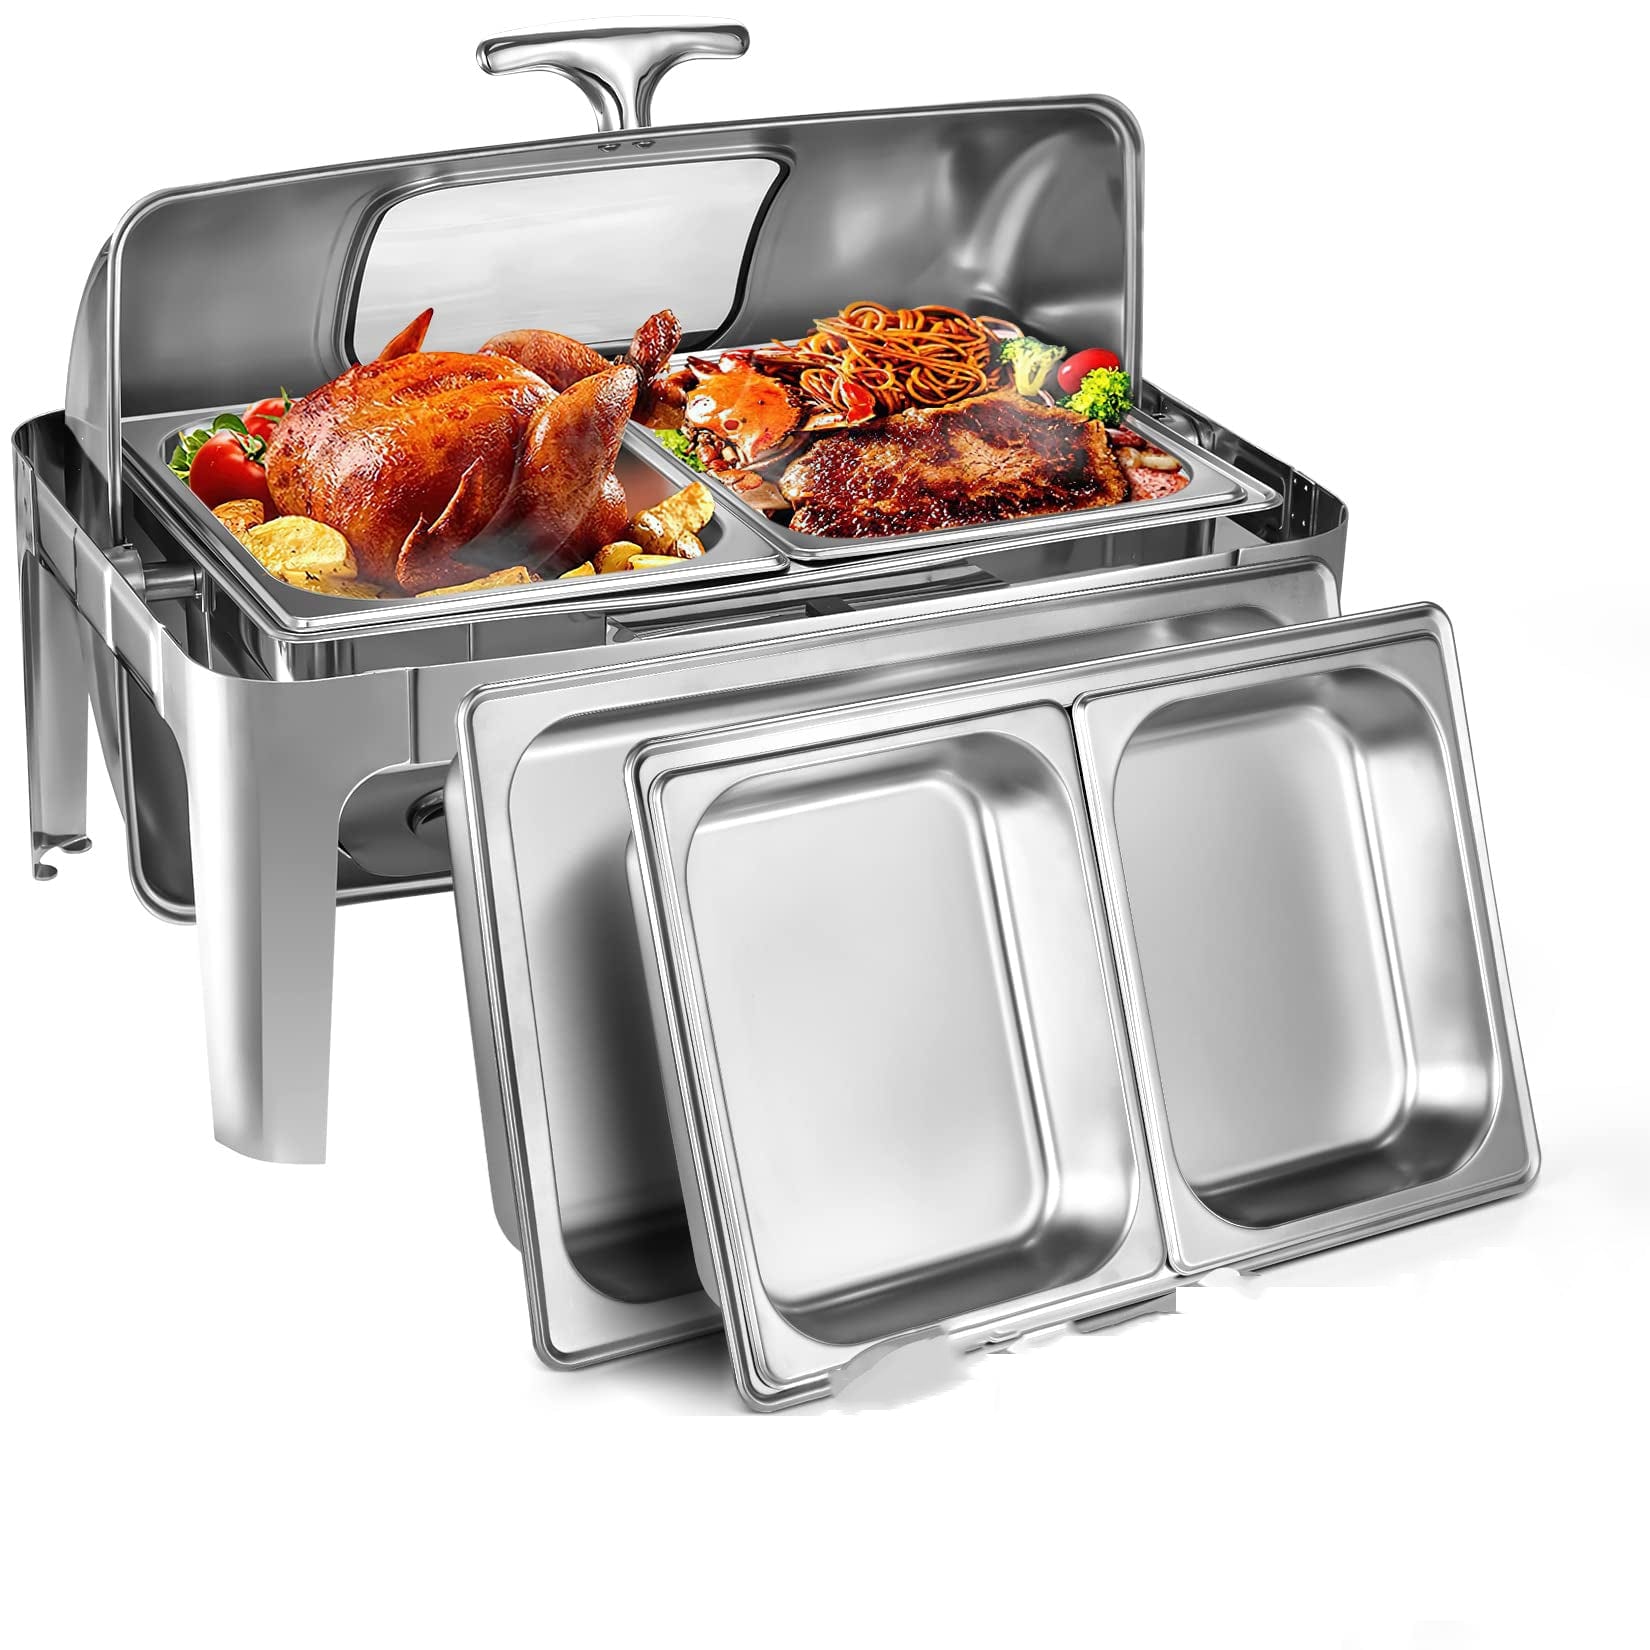 GARVEE 9QT Visible Roll Top Chafing Dish Buffet Set Stainless Steel Buffet